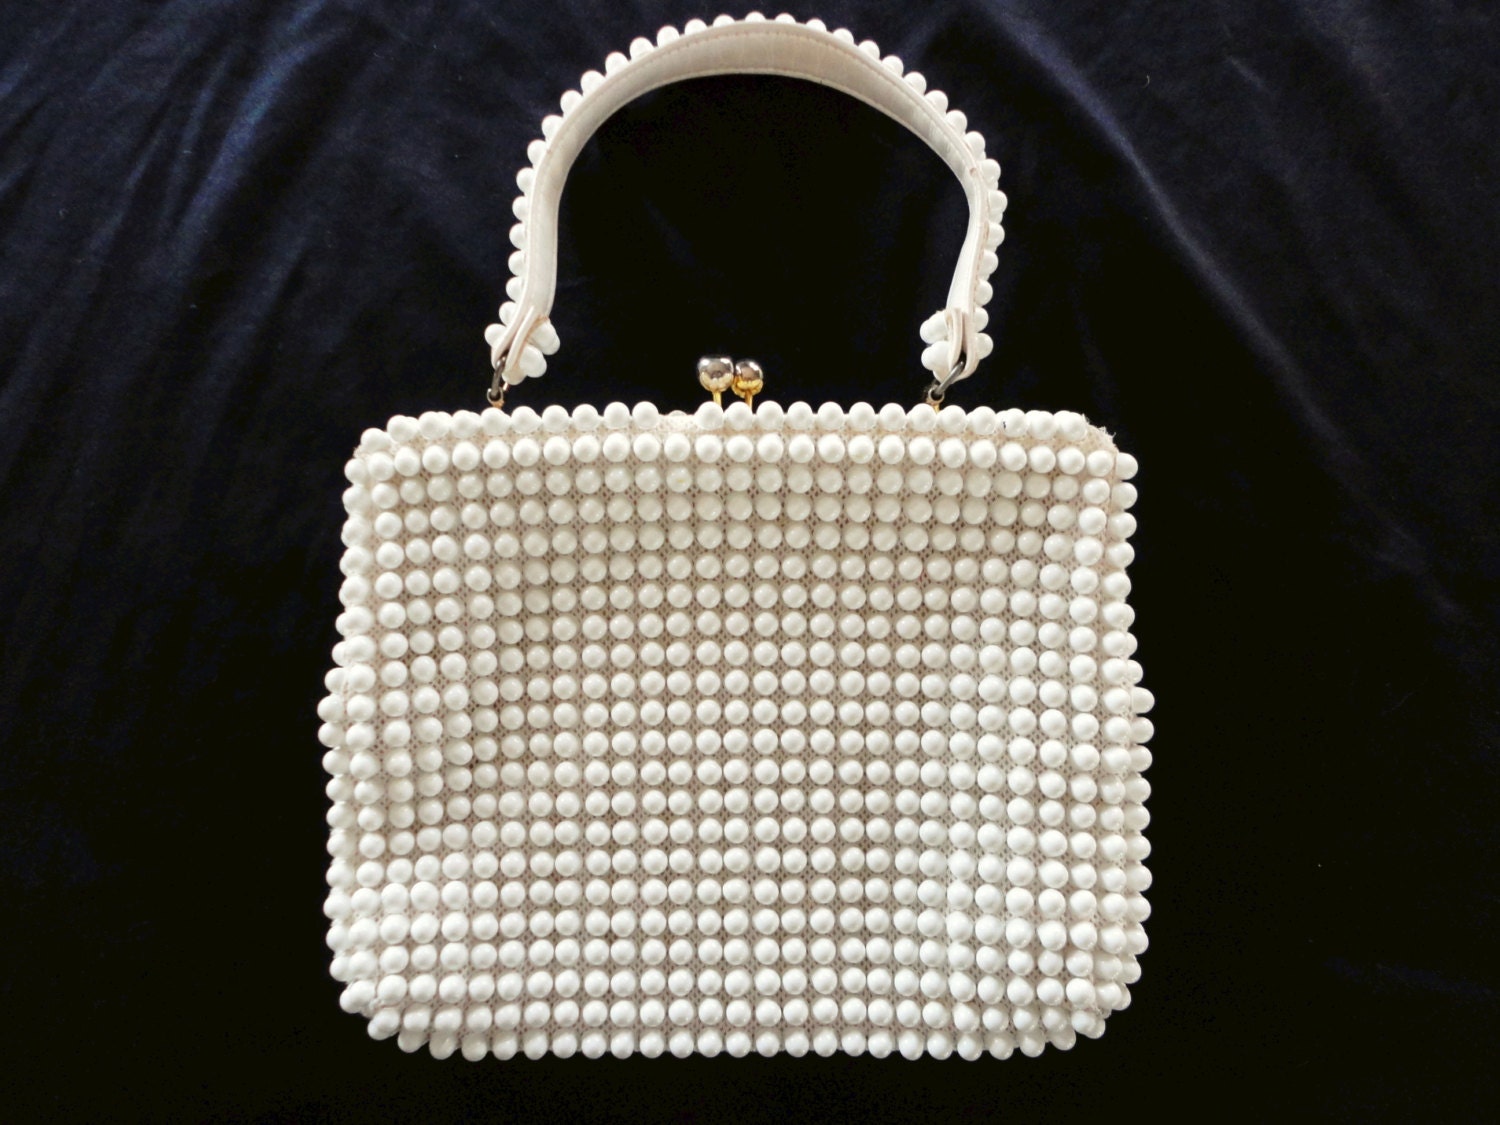 Vintage White Beaded Handbag with Handle and Snap Clasp